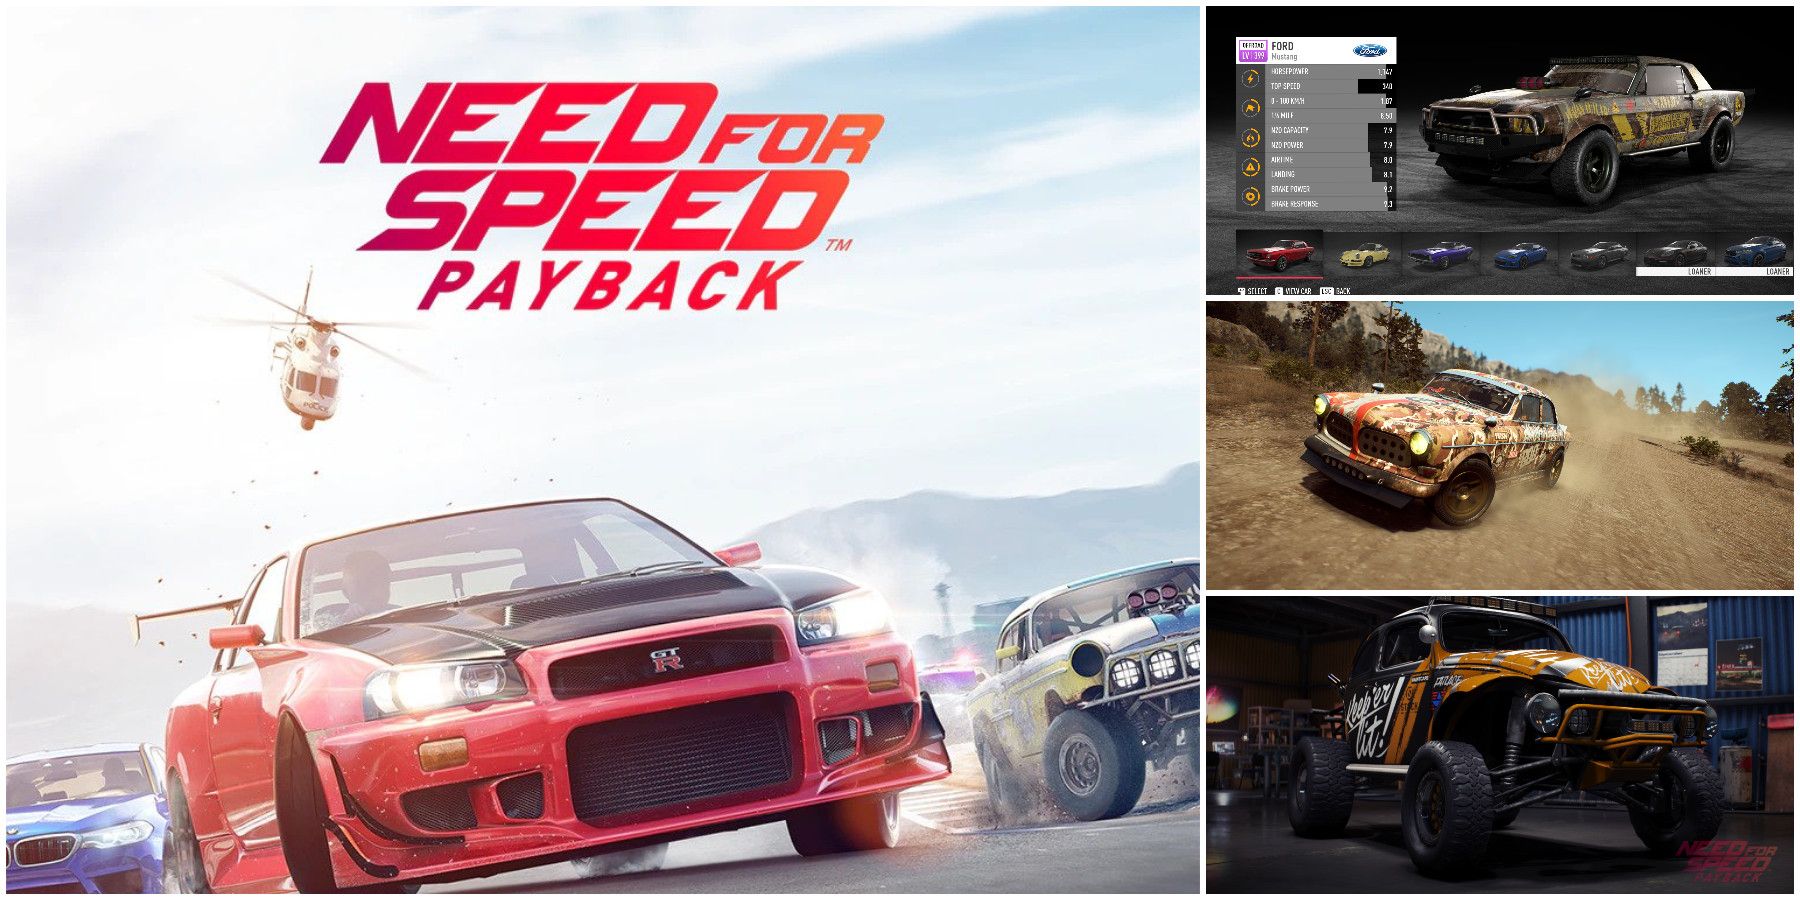 Off-road Cars Need for Speed Payback